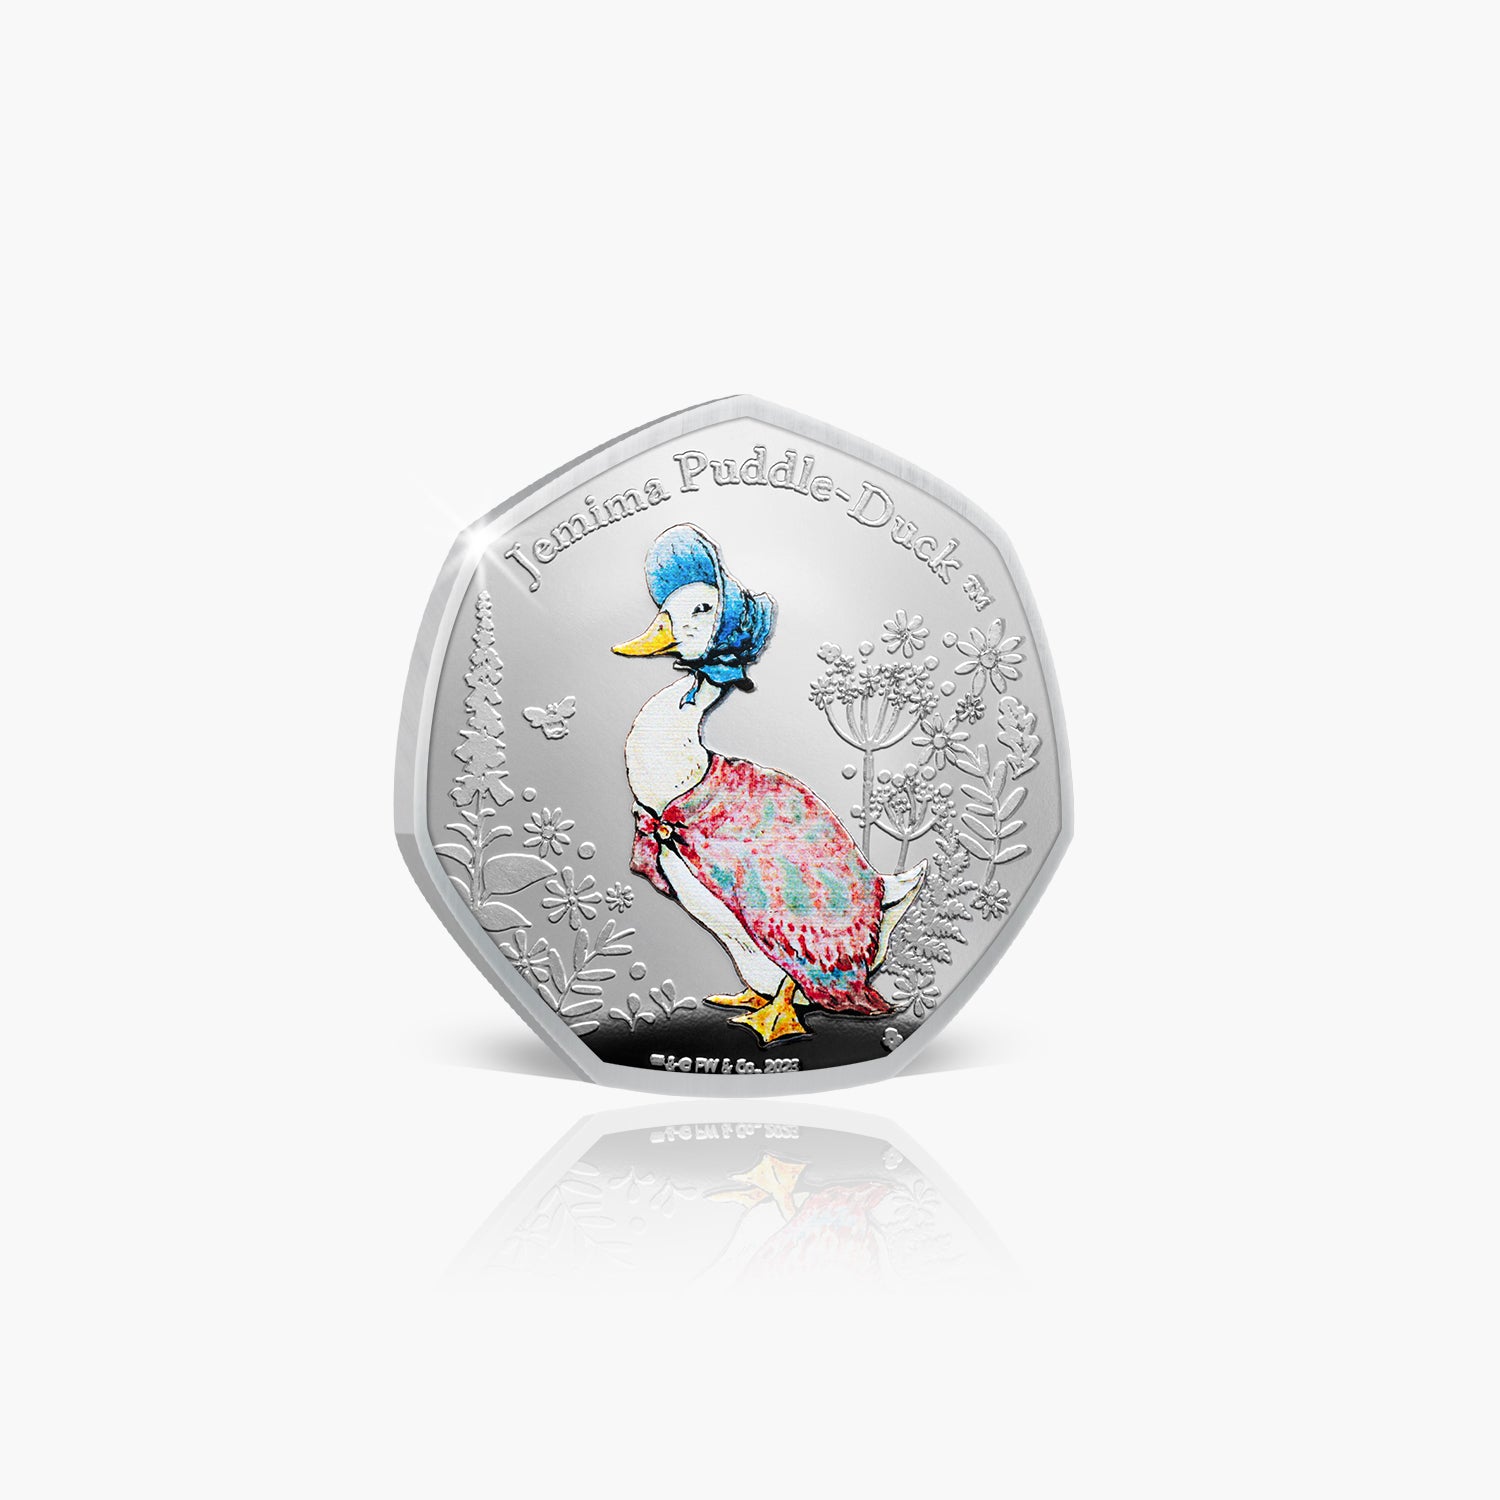 The World of Peter Rabbit 2023 Coin Collection - Jemima Puddle Duck Coin